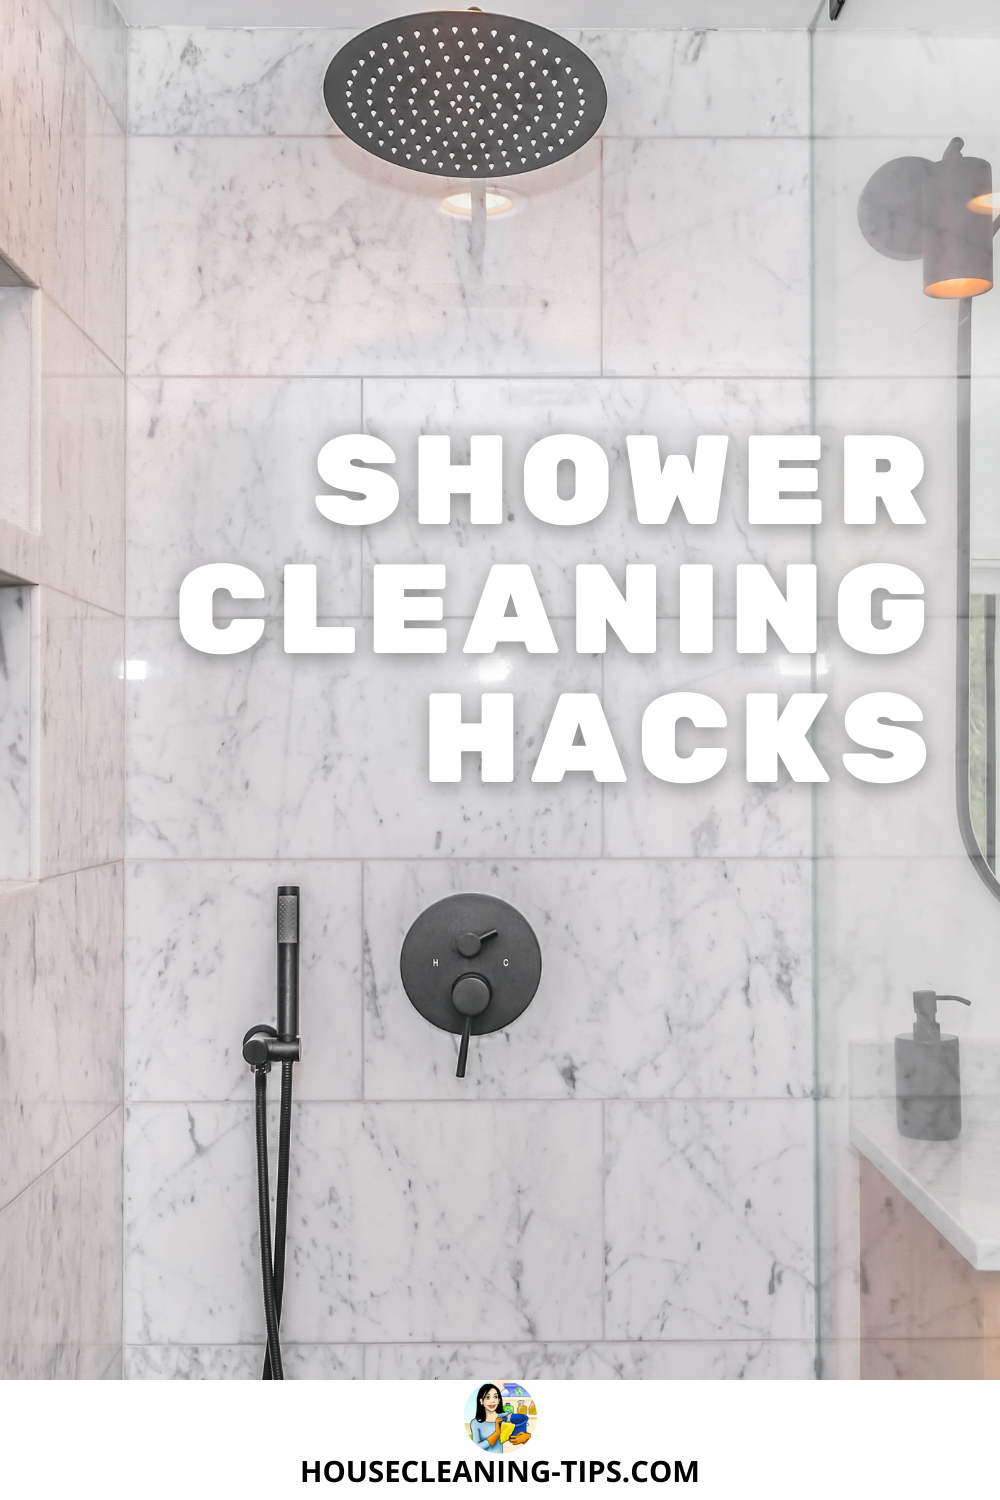 https://www.housecleaning-tips.com/image-files/shower-cleaning-hacks-1.png